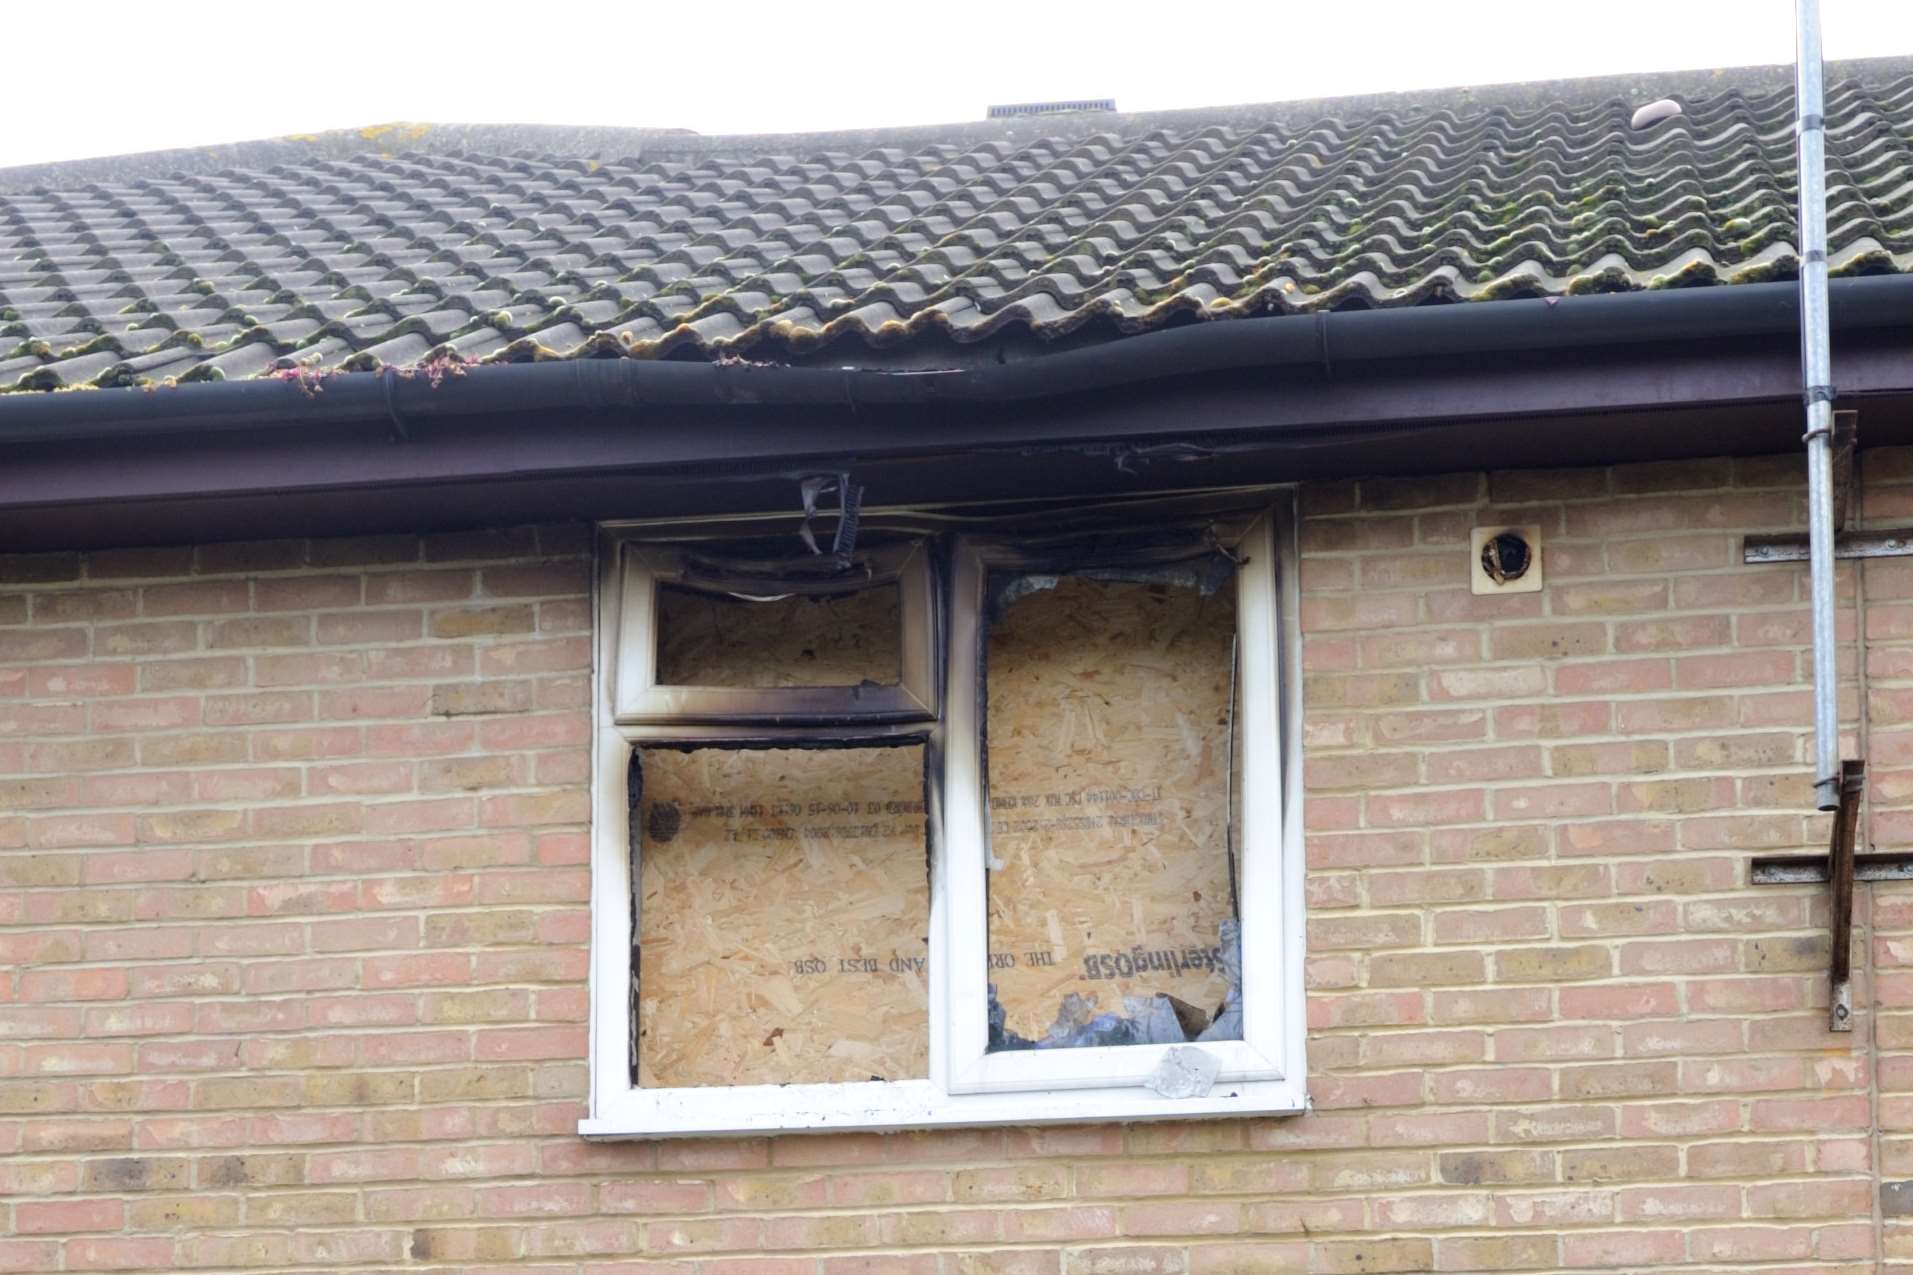 Kayleigh's flat was completely destroyed by the blaze